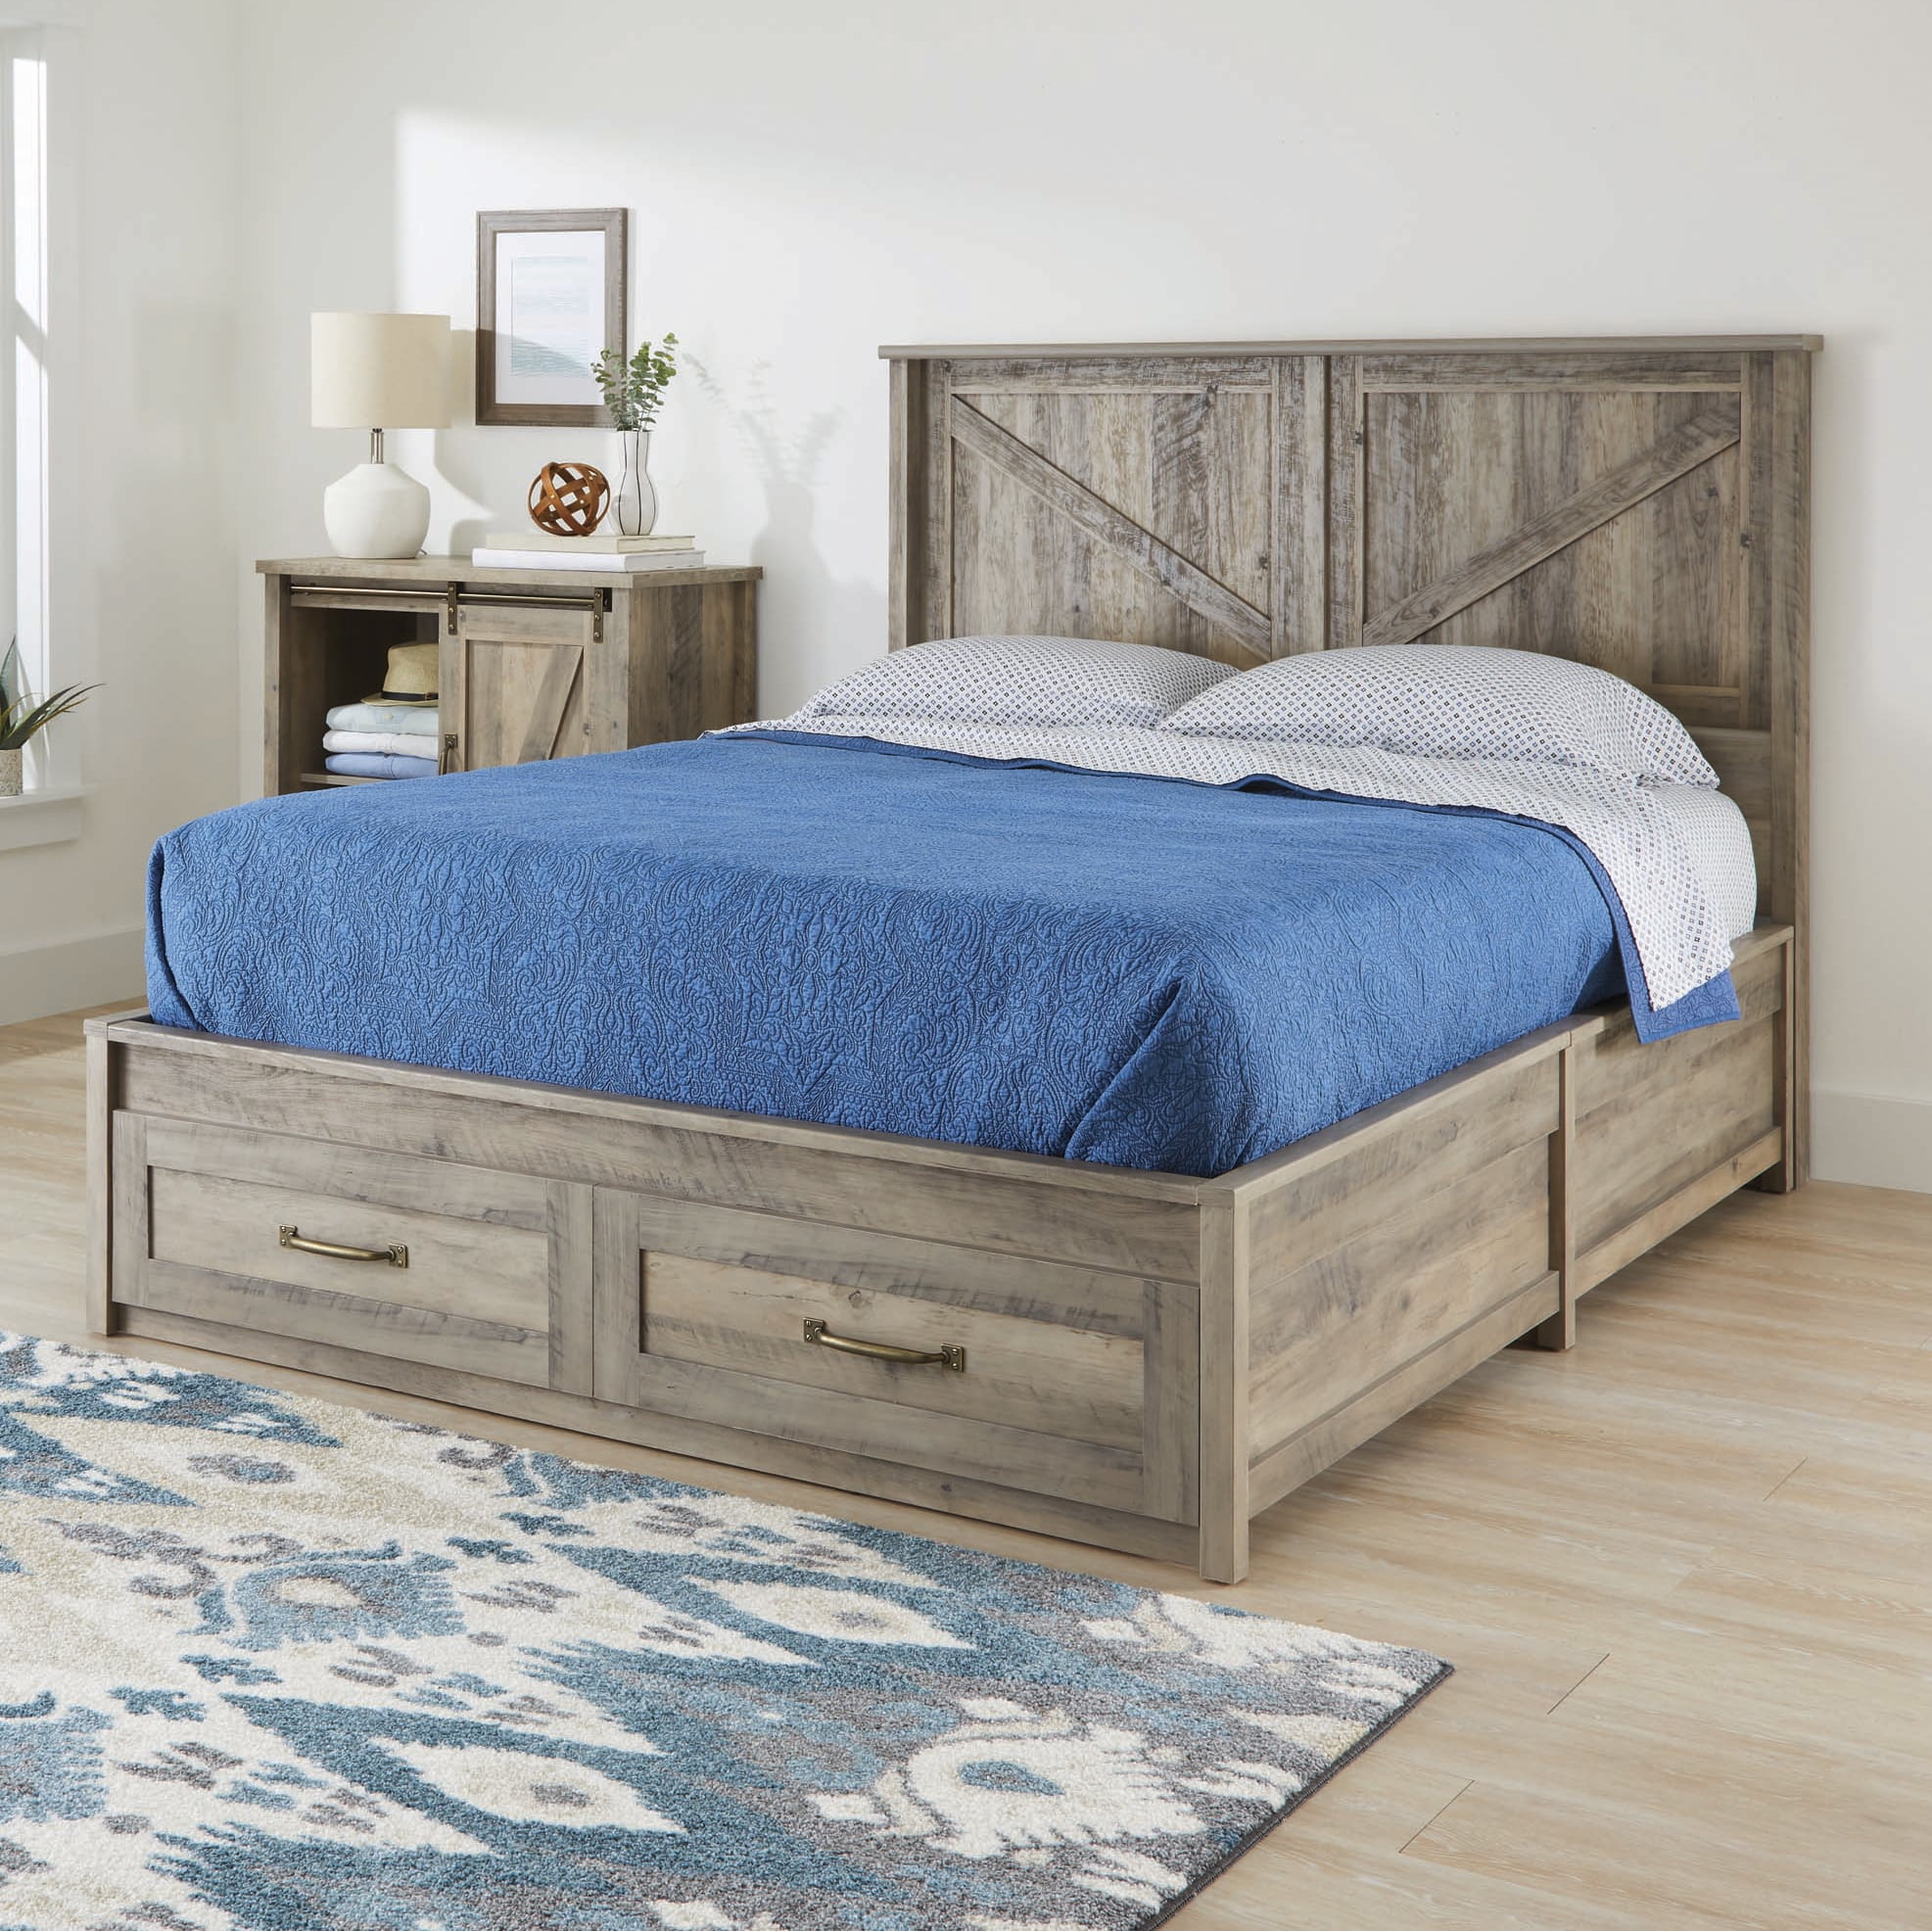 Headboard Oak Full Queen Size Finish Wooden Rustic Modern Country Cottage Bed 